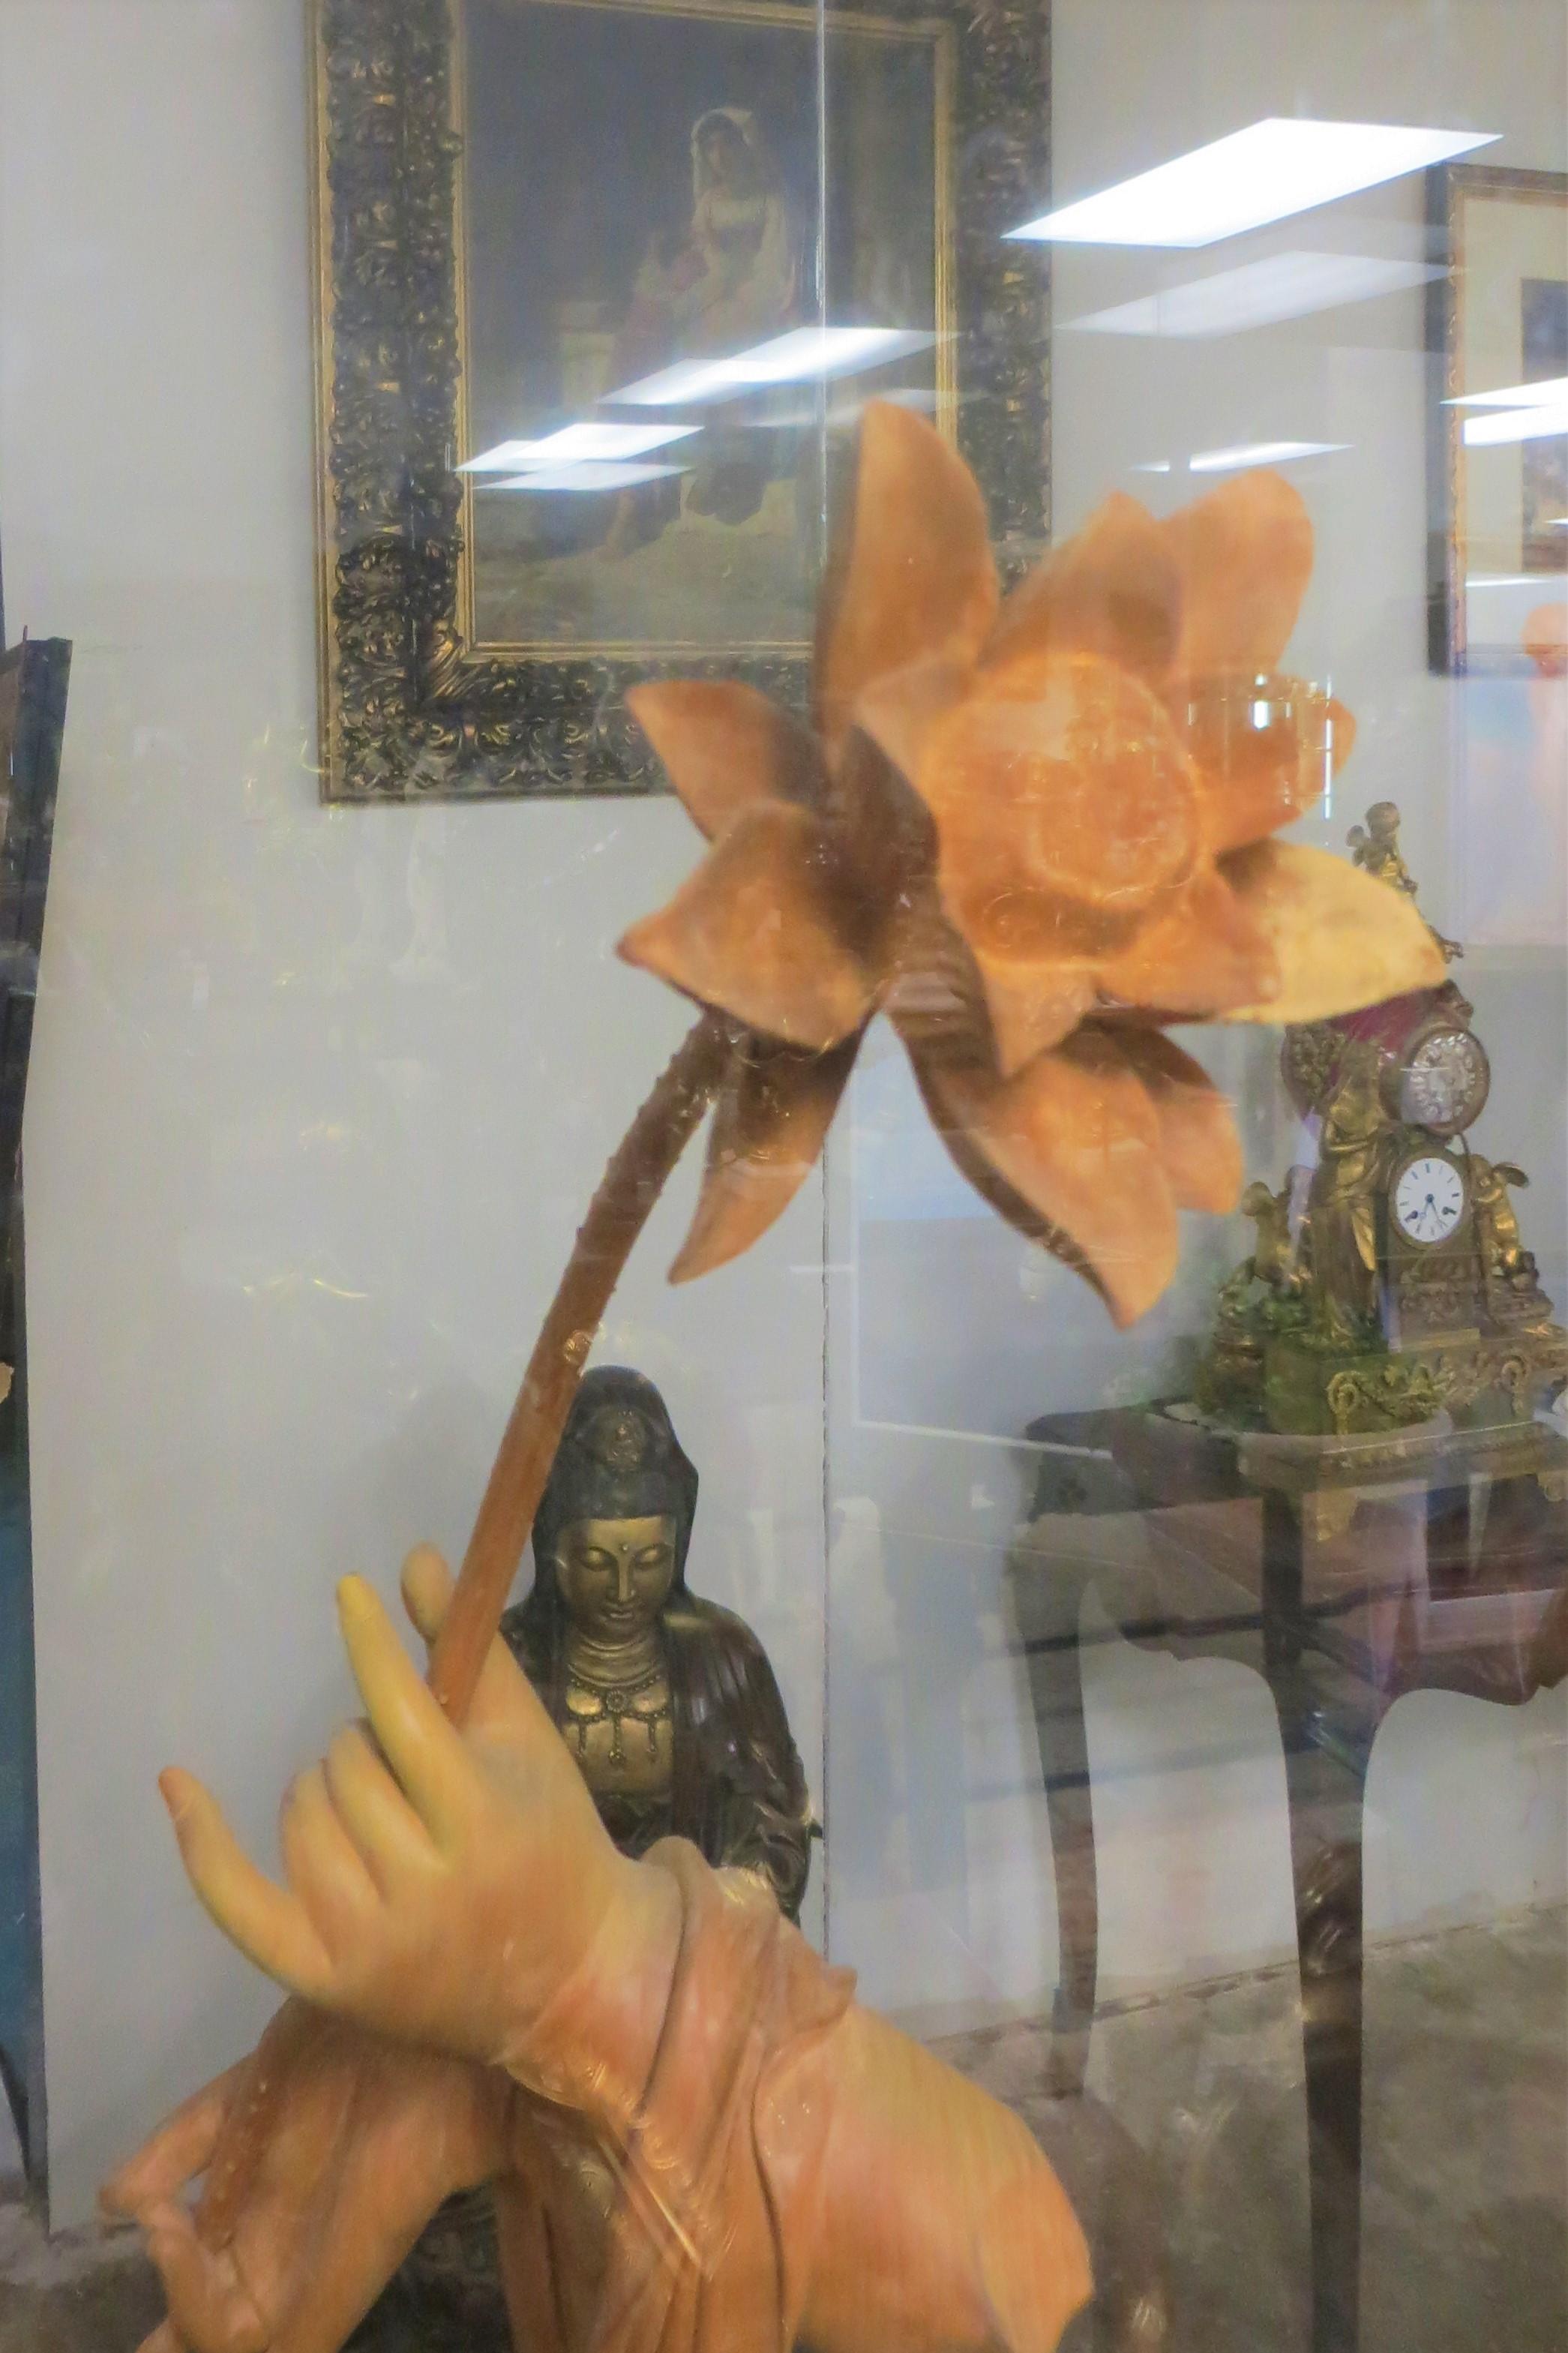 Wooden sculpture of a Chinese artist named Bones representing the hand of Boudha holding a lotus flower.
put in a plexiglass box .